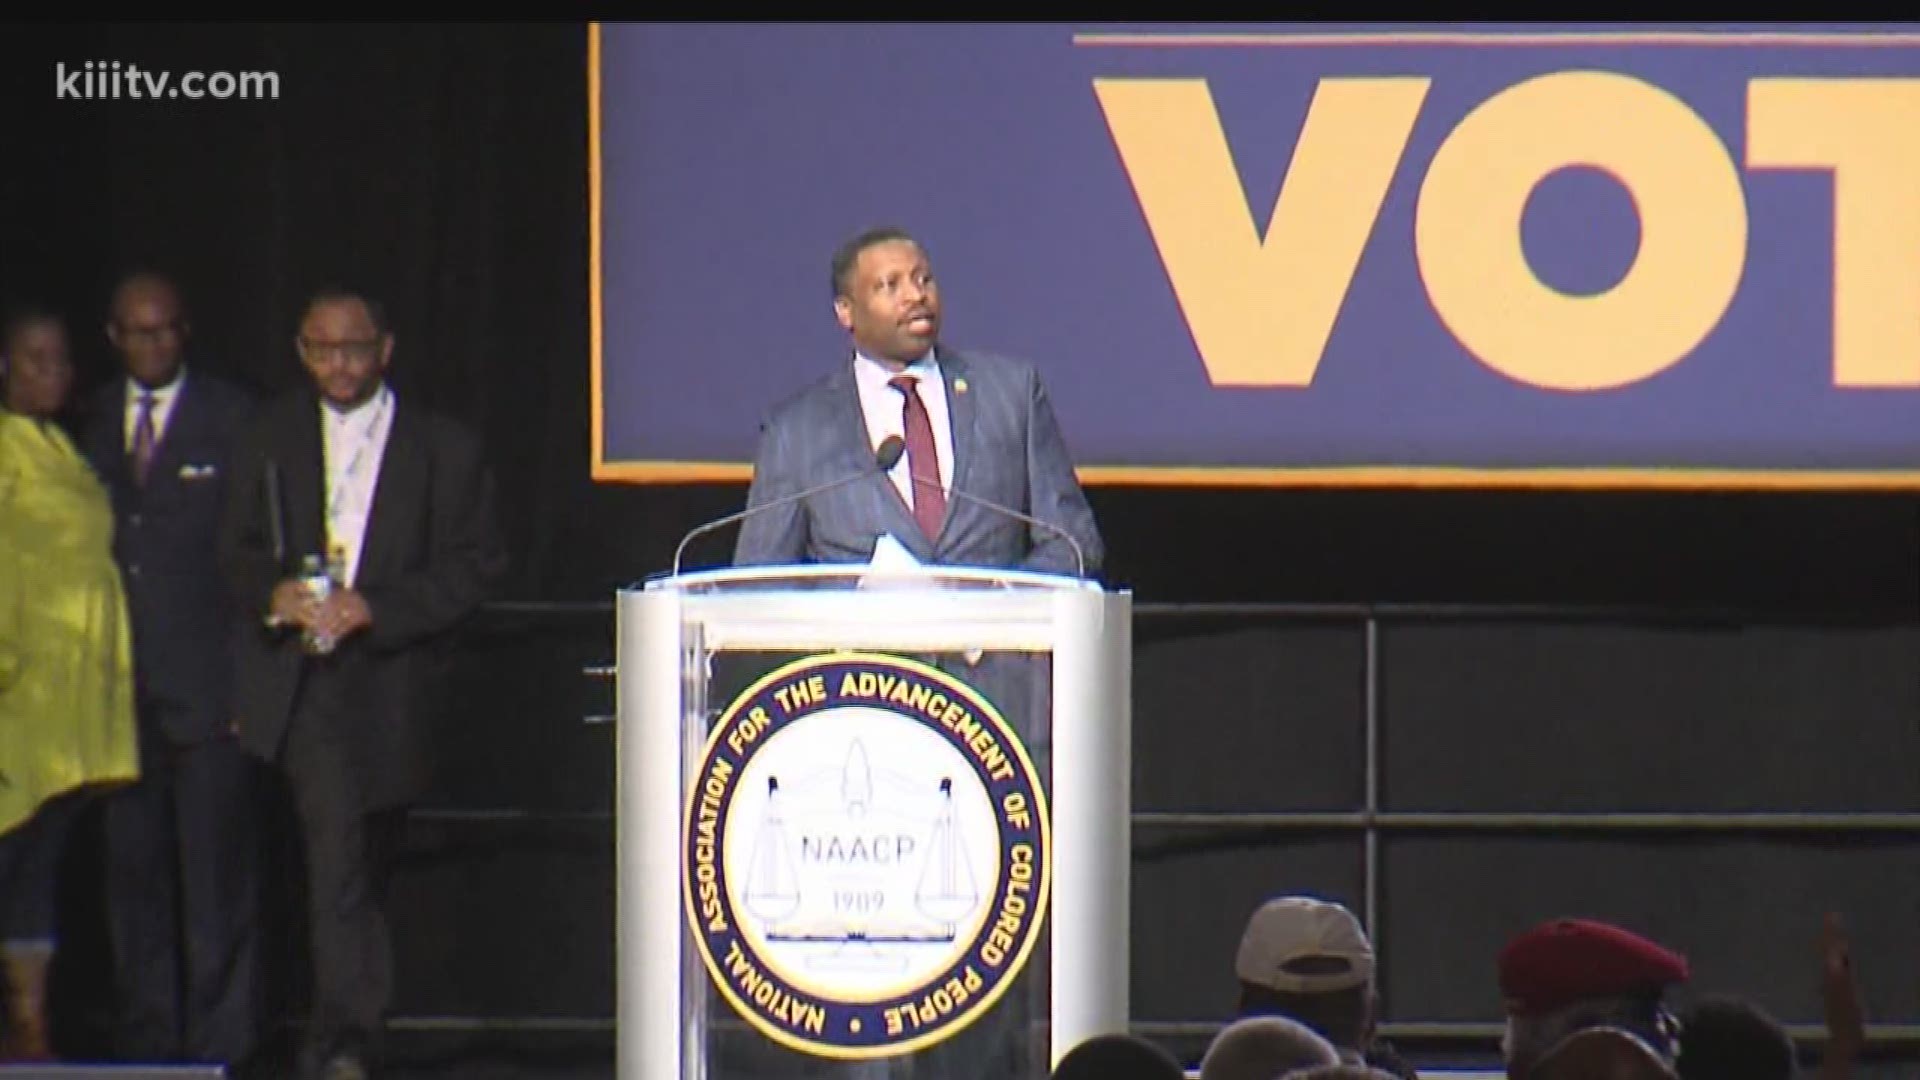 The 109th NAACP National Convention is underway in San Antonio.
KIII-TV was the only station invited to interview the NAACP National President Derrick Johnson.
Our Michael Gibson was the one who spoke with him about the big issues the organization plans t